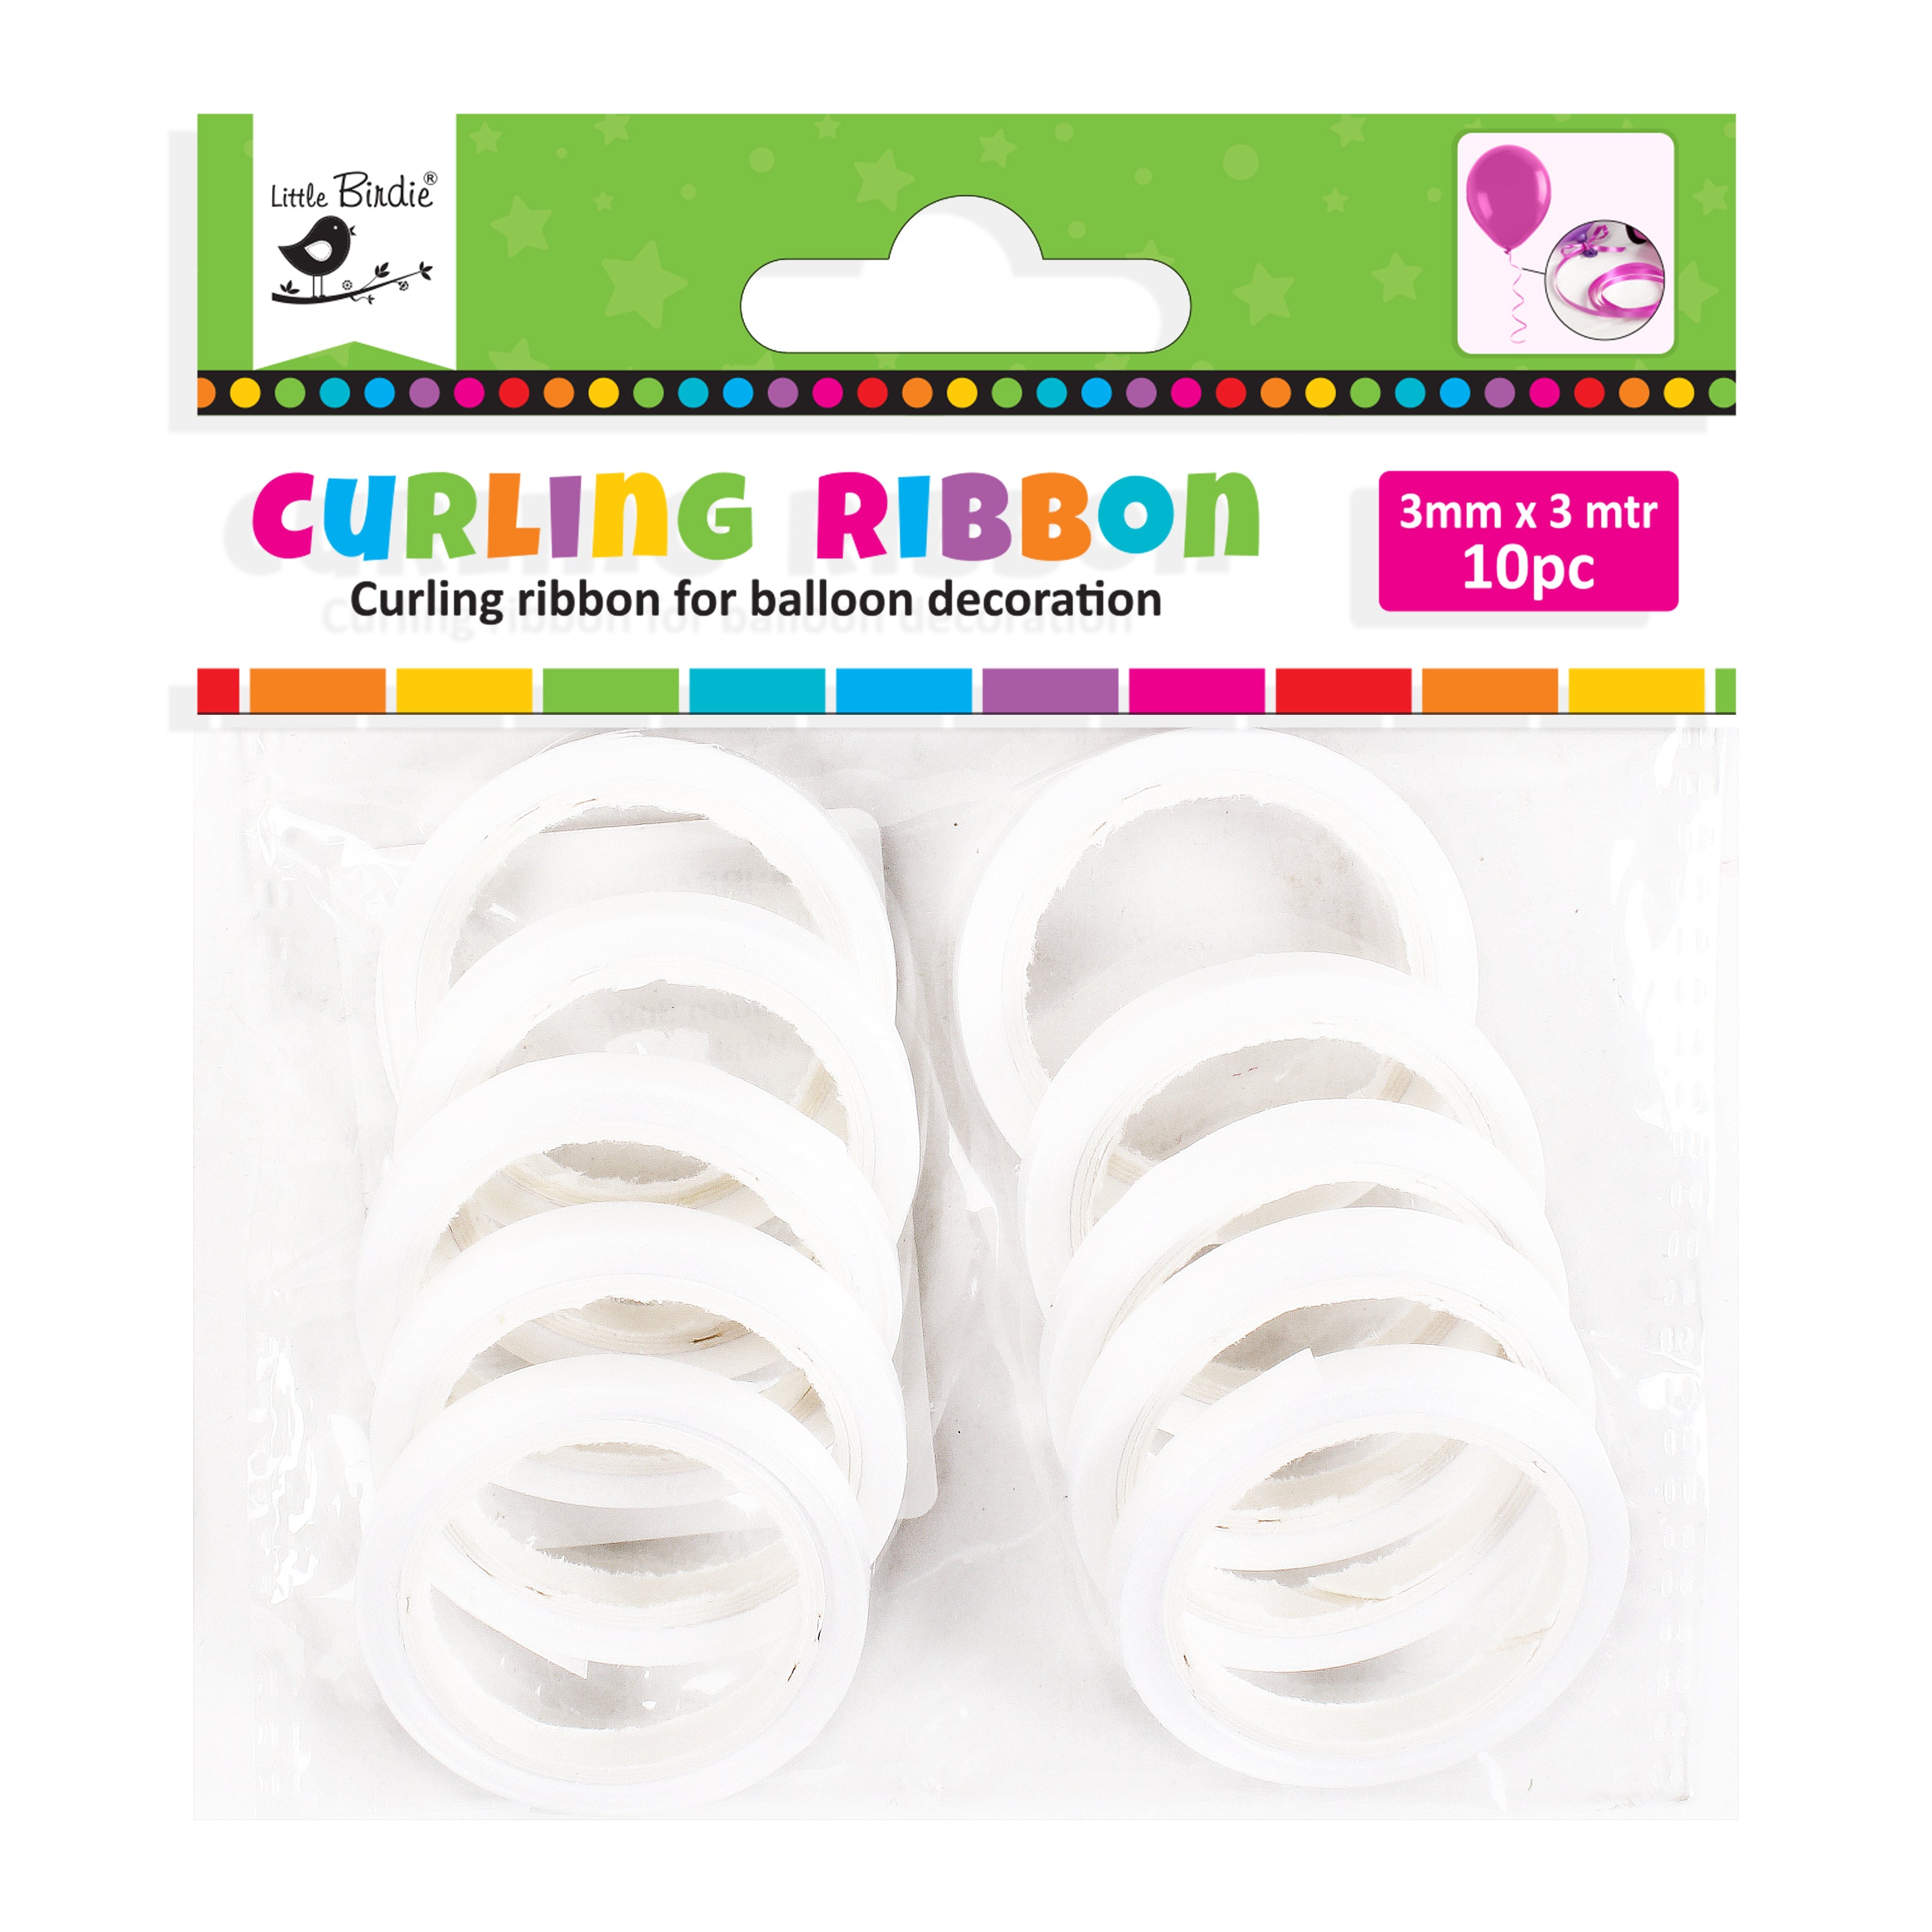 Curling Ribbon For Balloon Decoration 3mm X 3mtr White 10pc